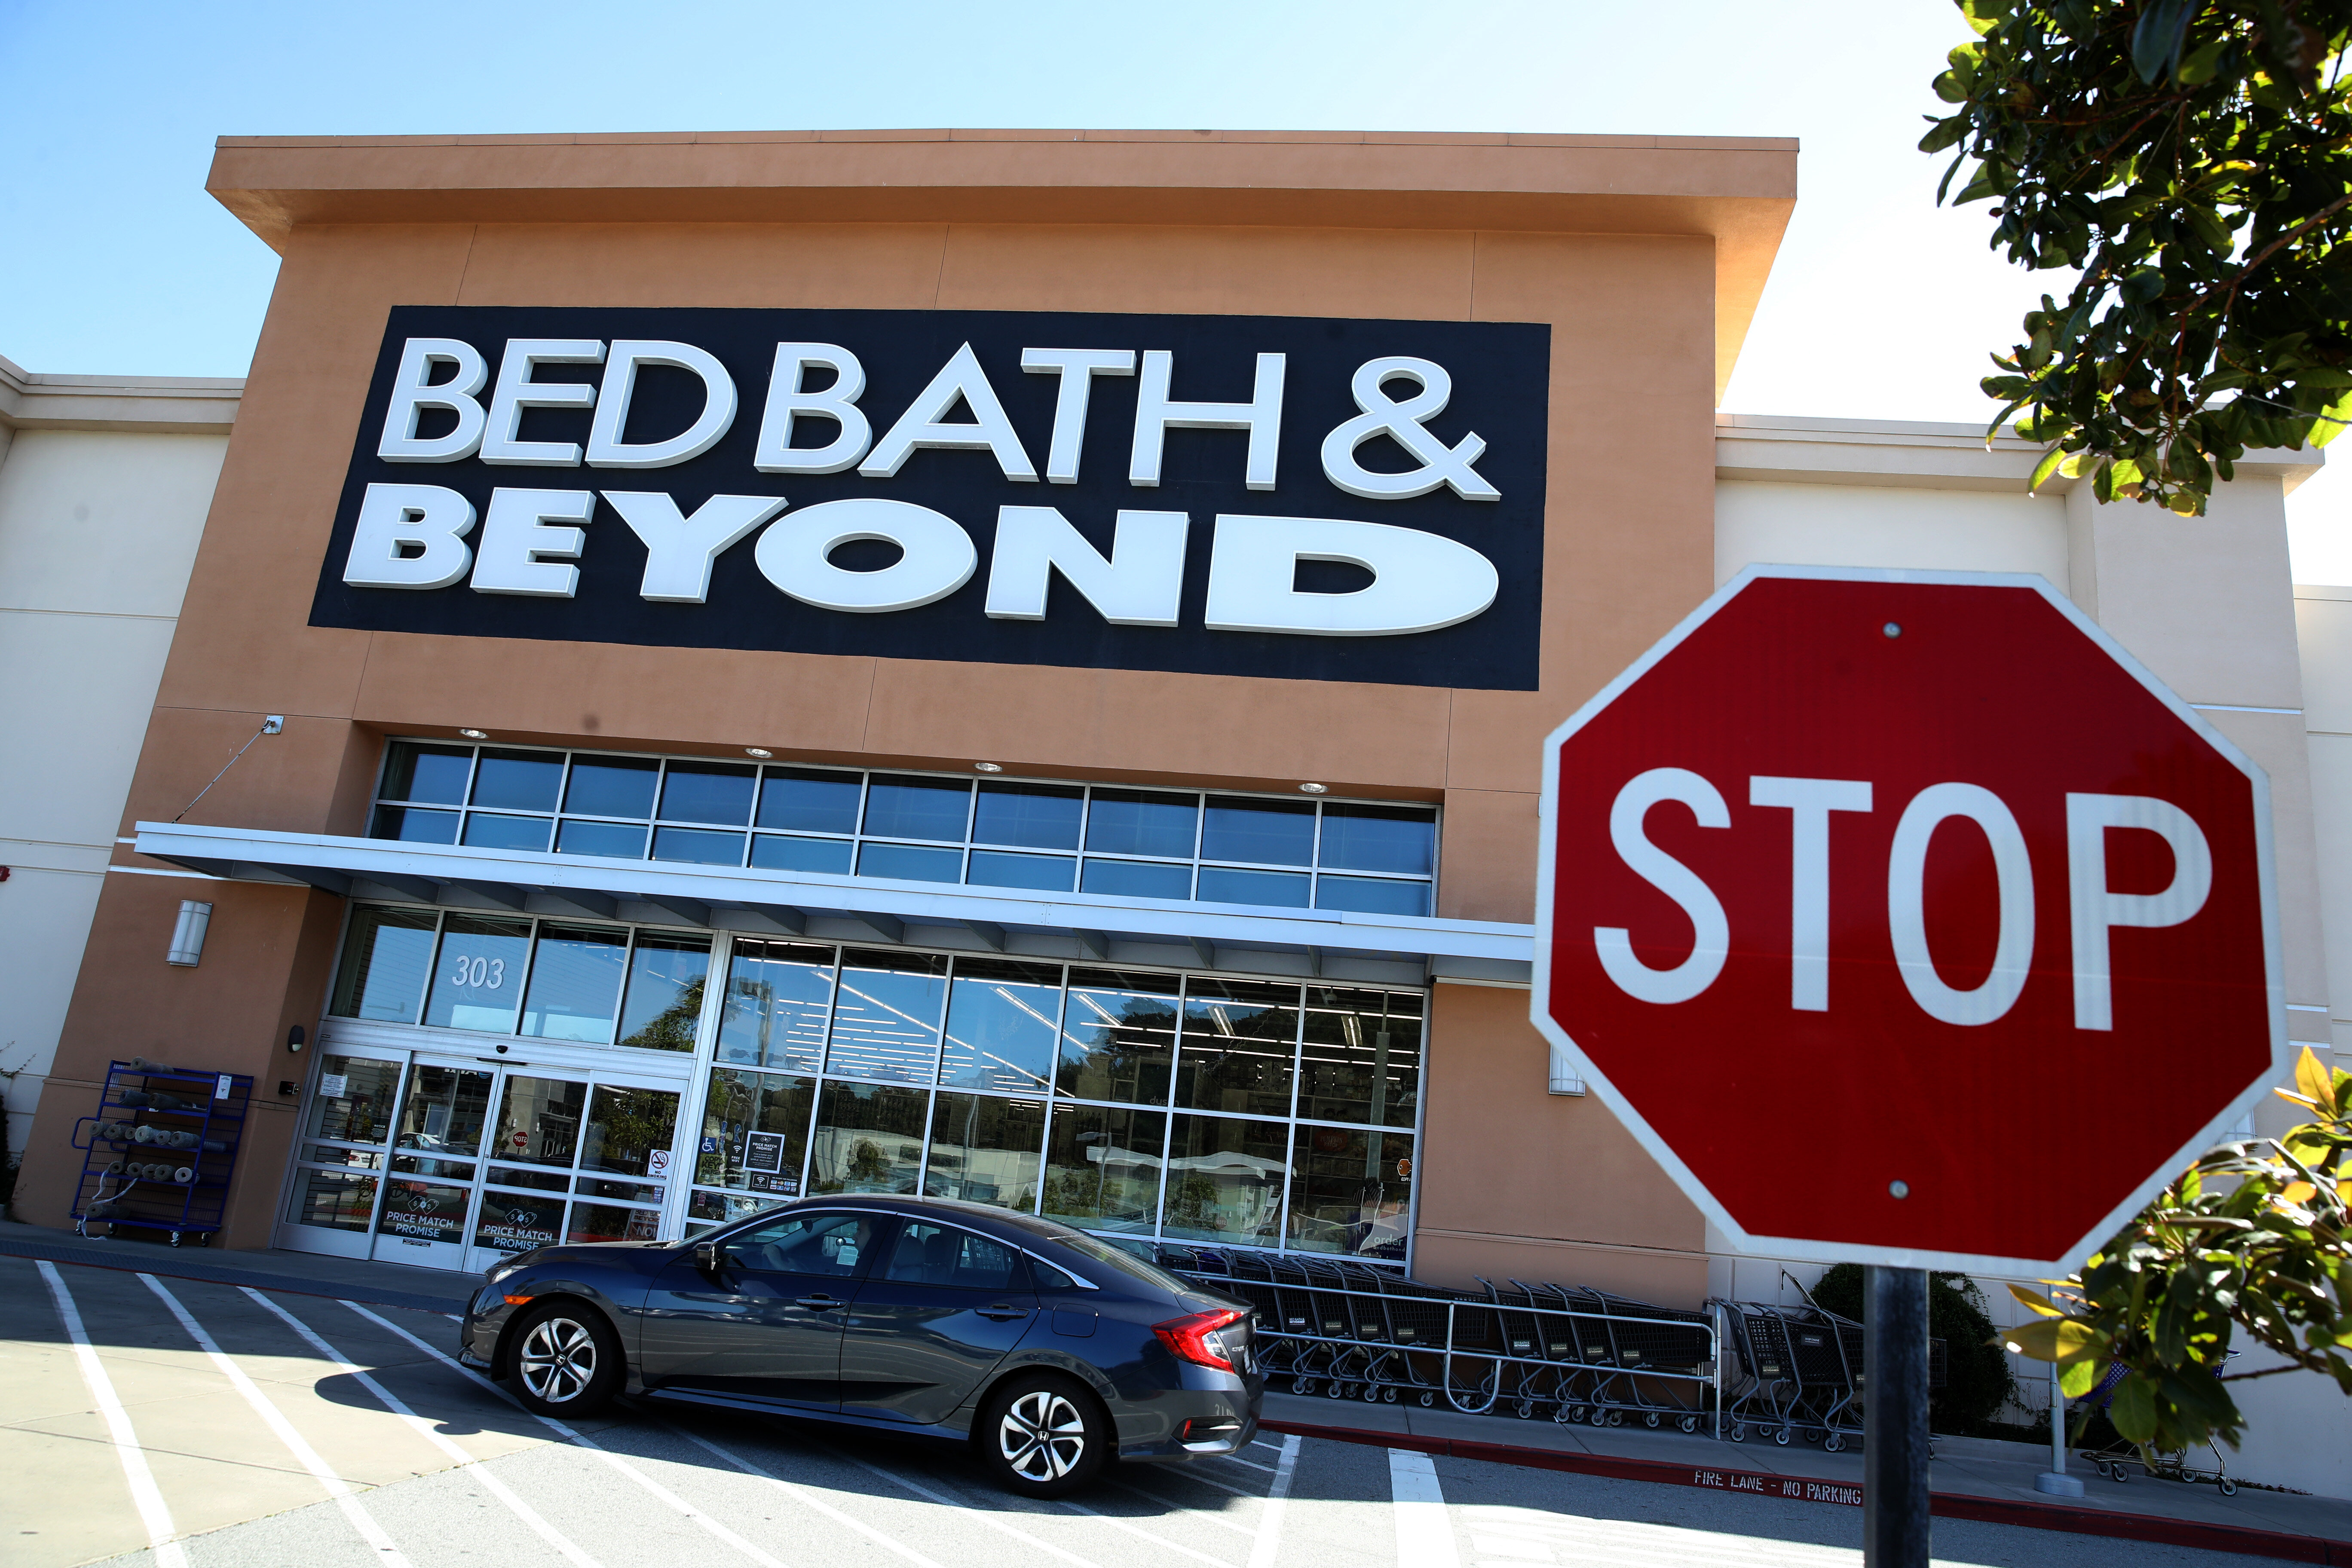 bed bath and beyond jobs